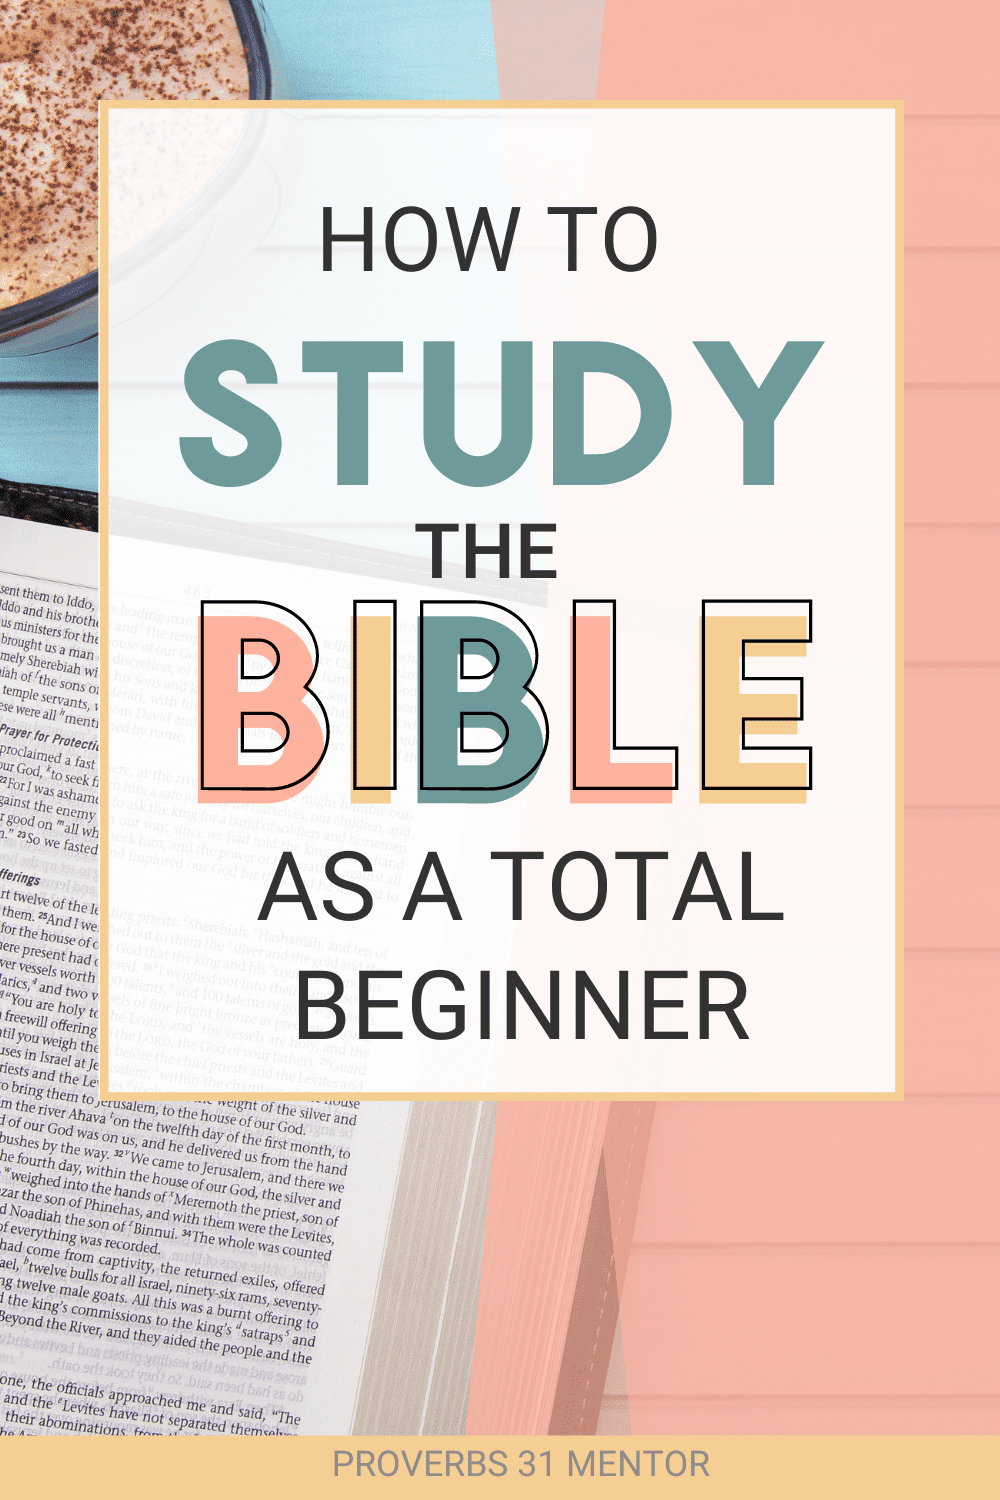 Title- How to Study the Bible as a Total Beginner Picture-open Bible and coffee